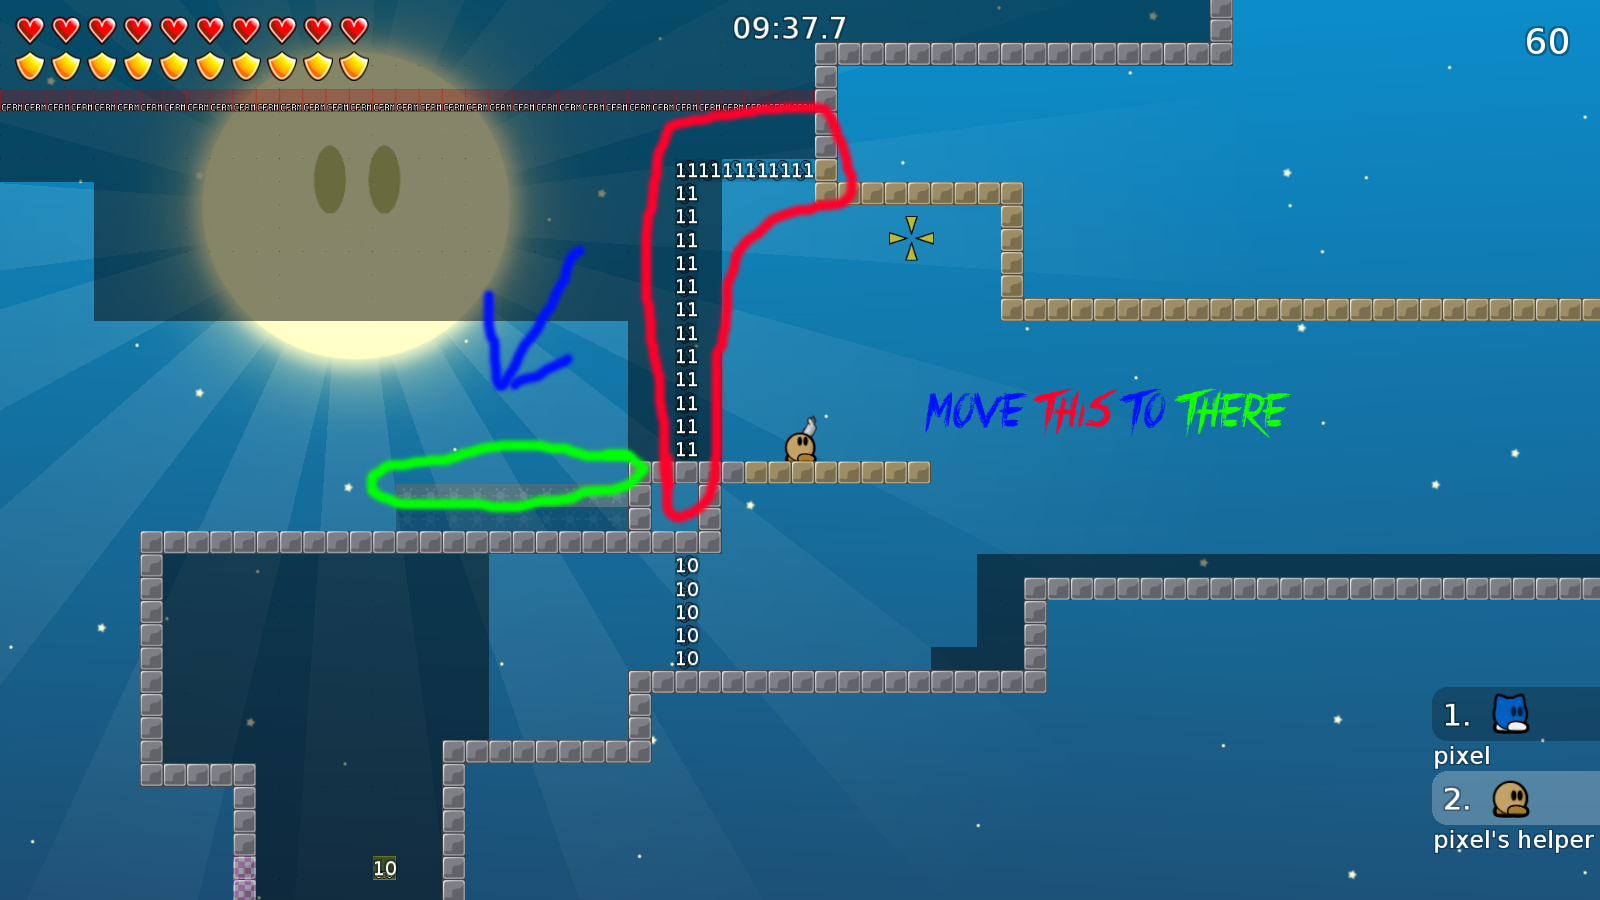 If you hammer the deep frozen tee up in teleporter it will be fail ... move the cp to the green marked Thing.